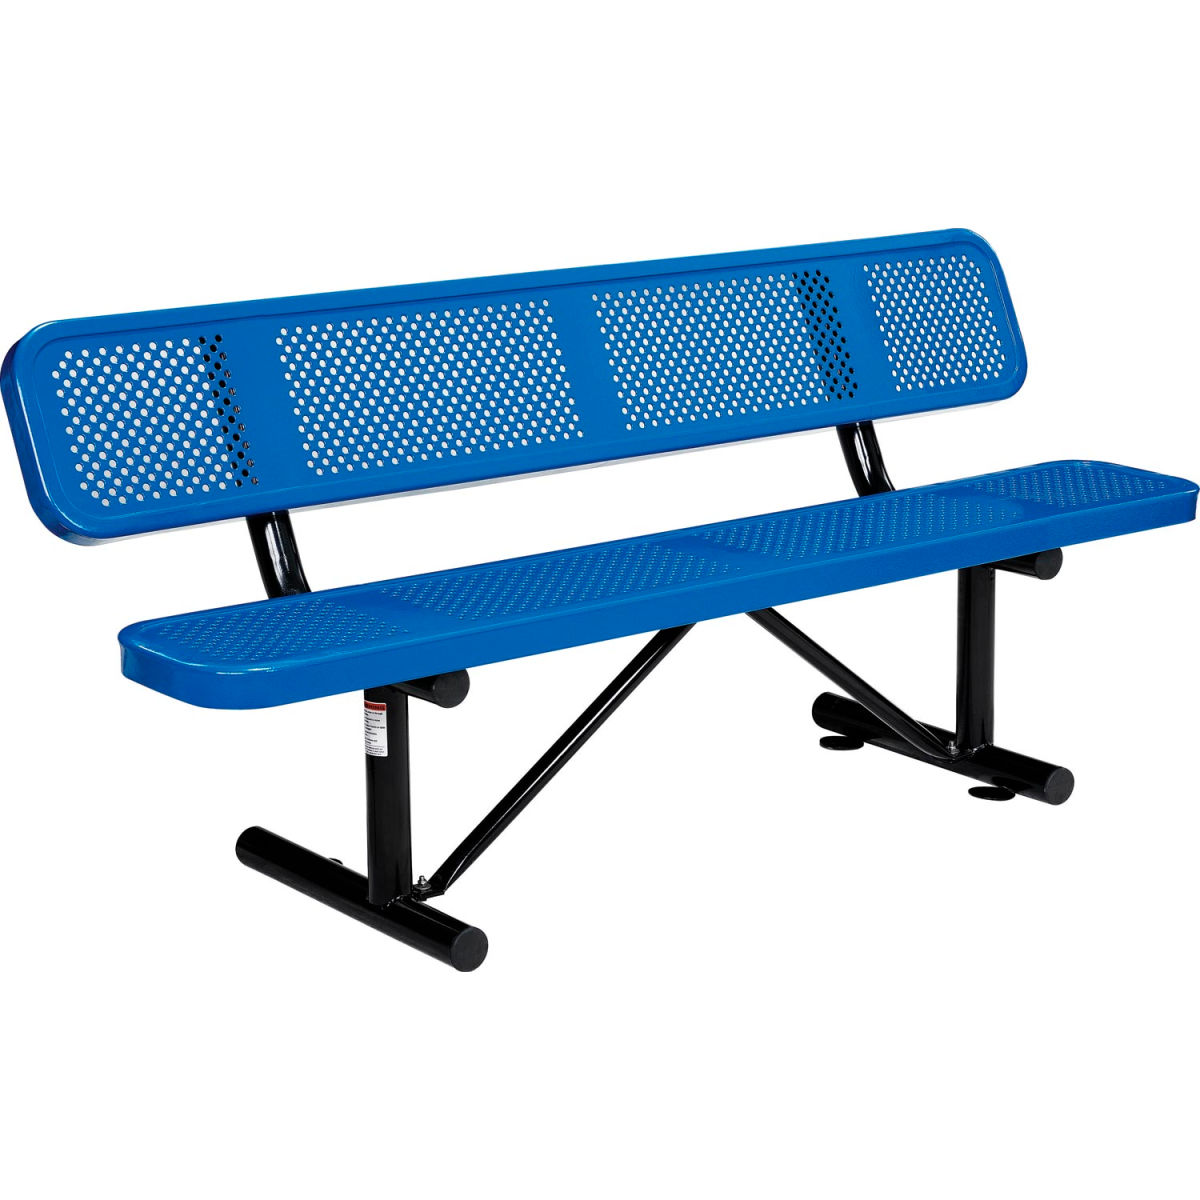 Picture of Global Industrial 3321318 6 ft. Outdoor Steel Picnic Bench with Backrest & Perforated Metal - Blue